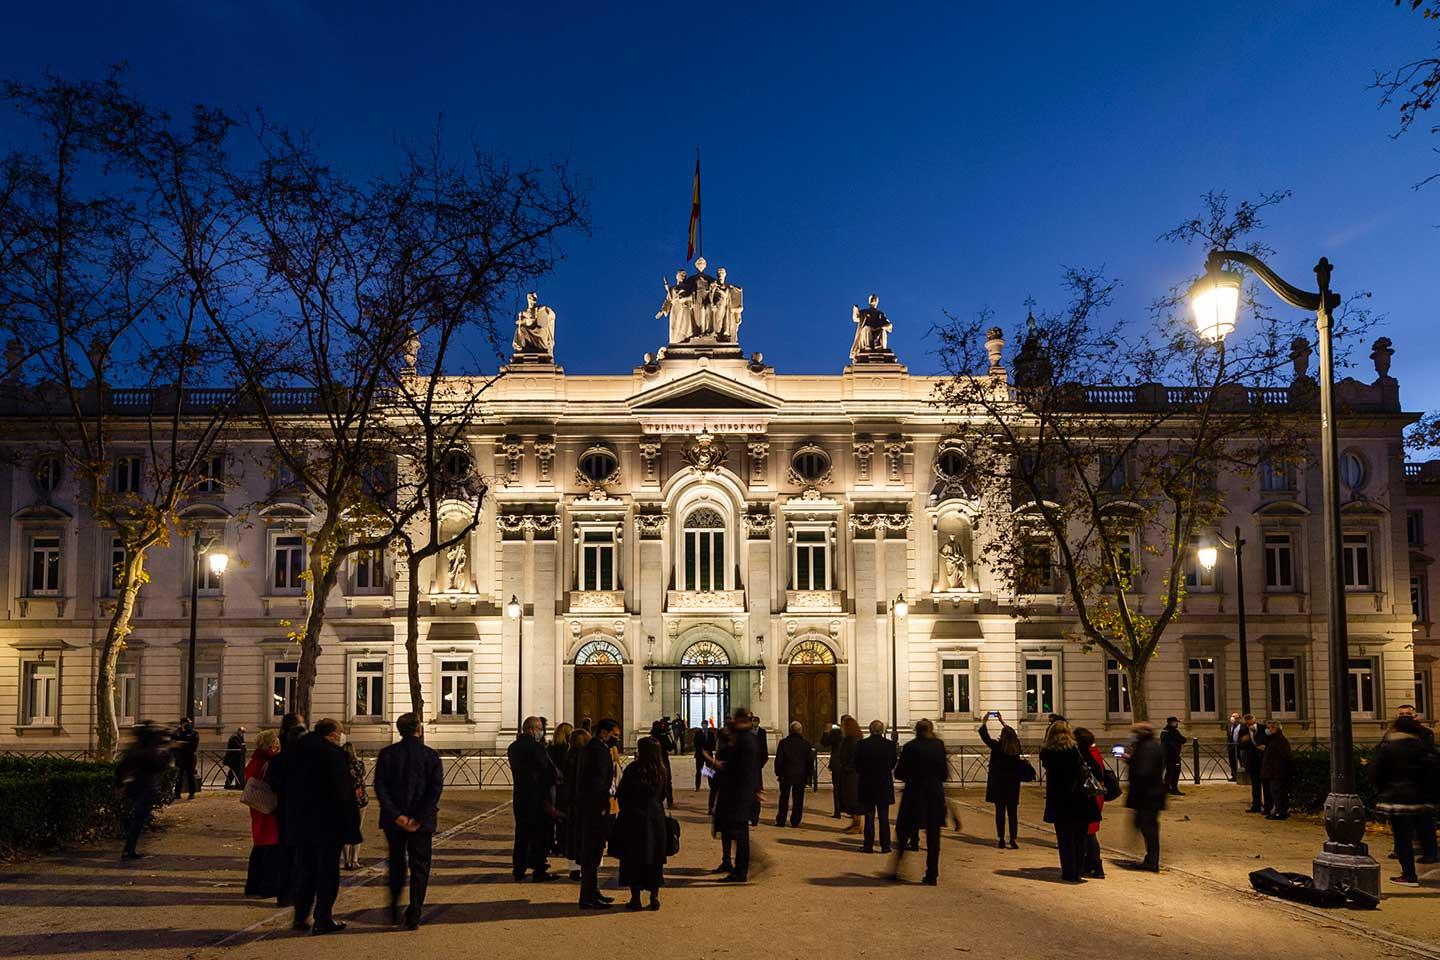 SCULP floodlights illuminate Supreme Courthouse in Madrid revealing intricate architectural details by night so passer-bys can admire